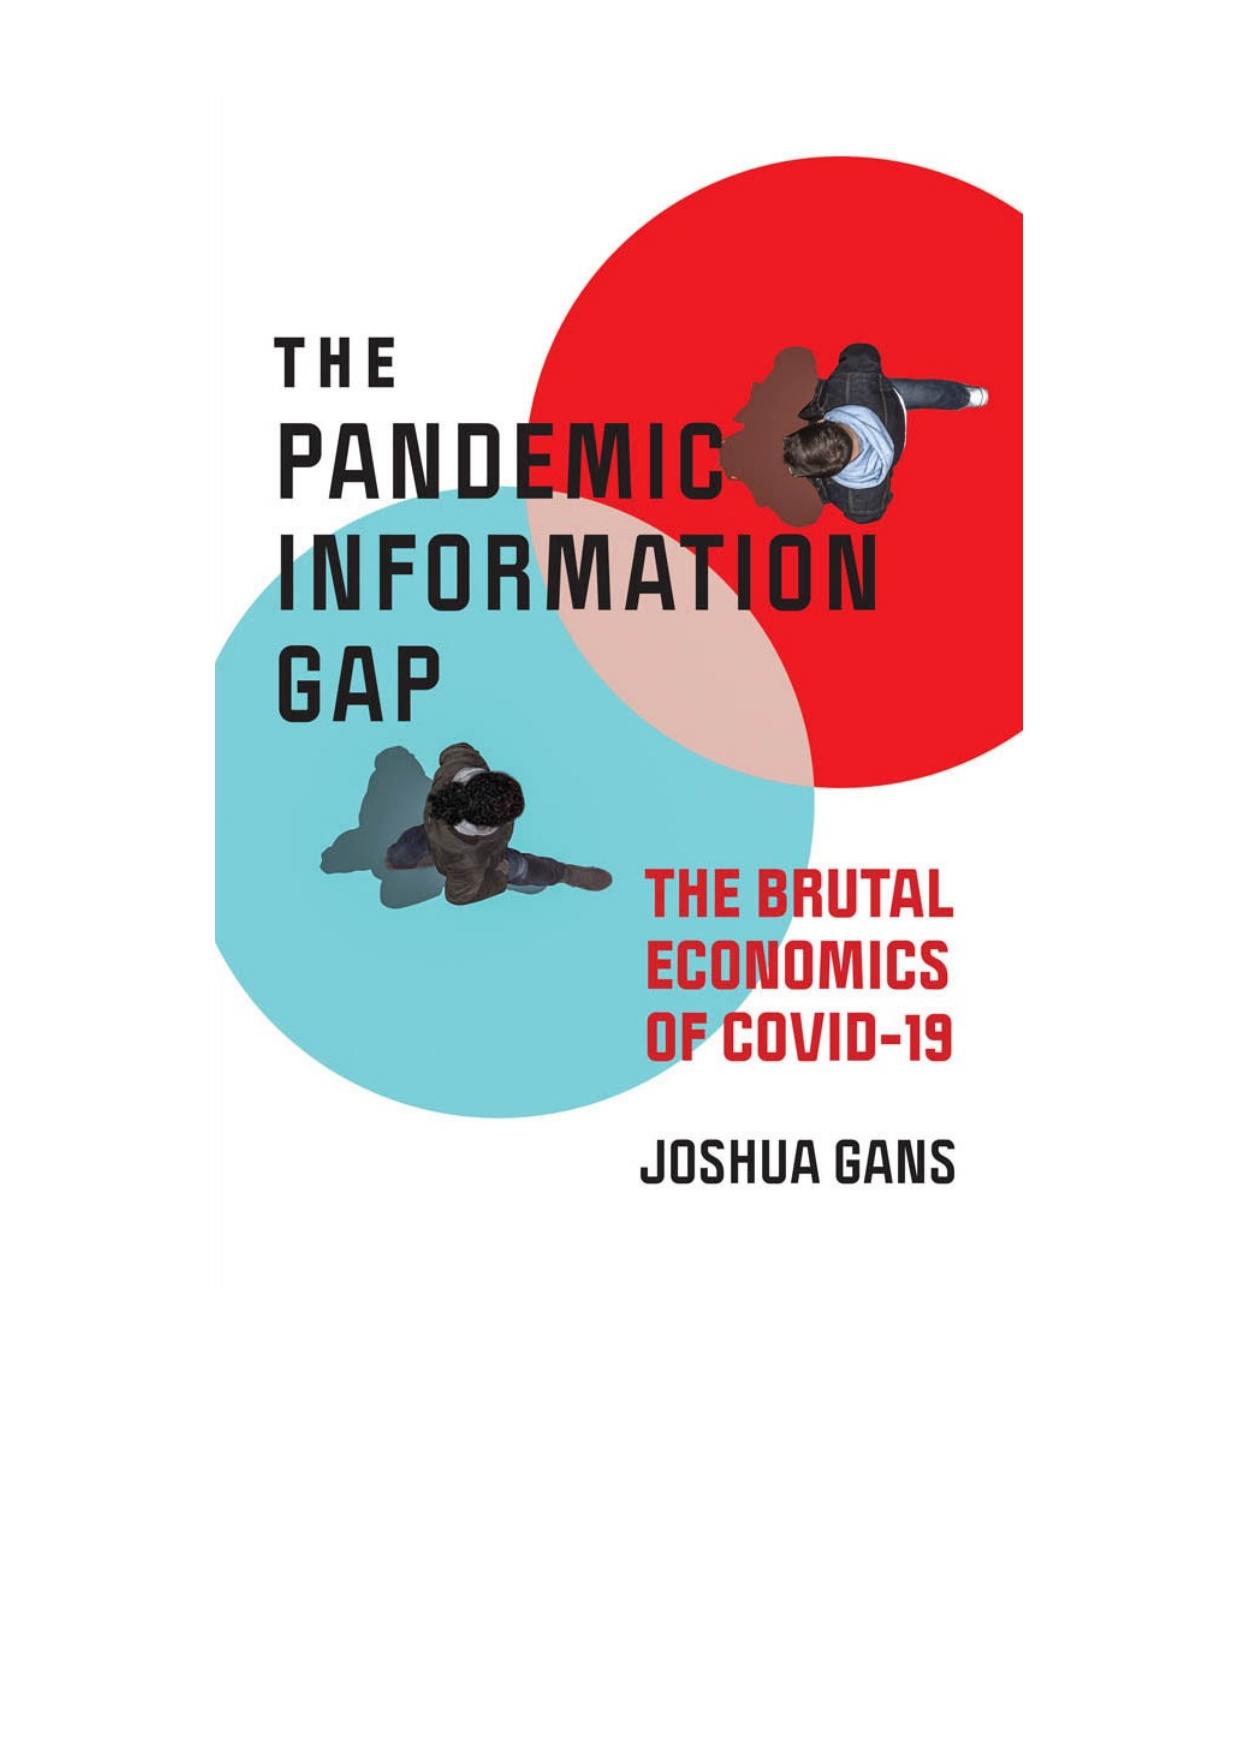 The Pandemic Information Gap: The Brutal Economics of COVID-19 by Joshua Gans